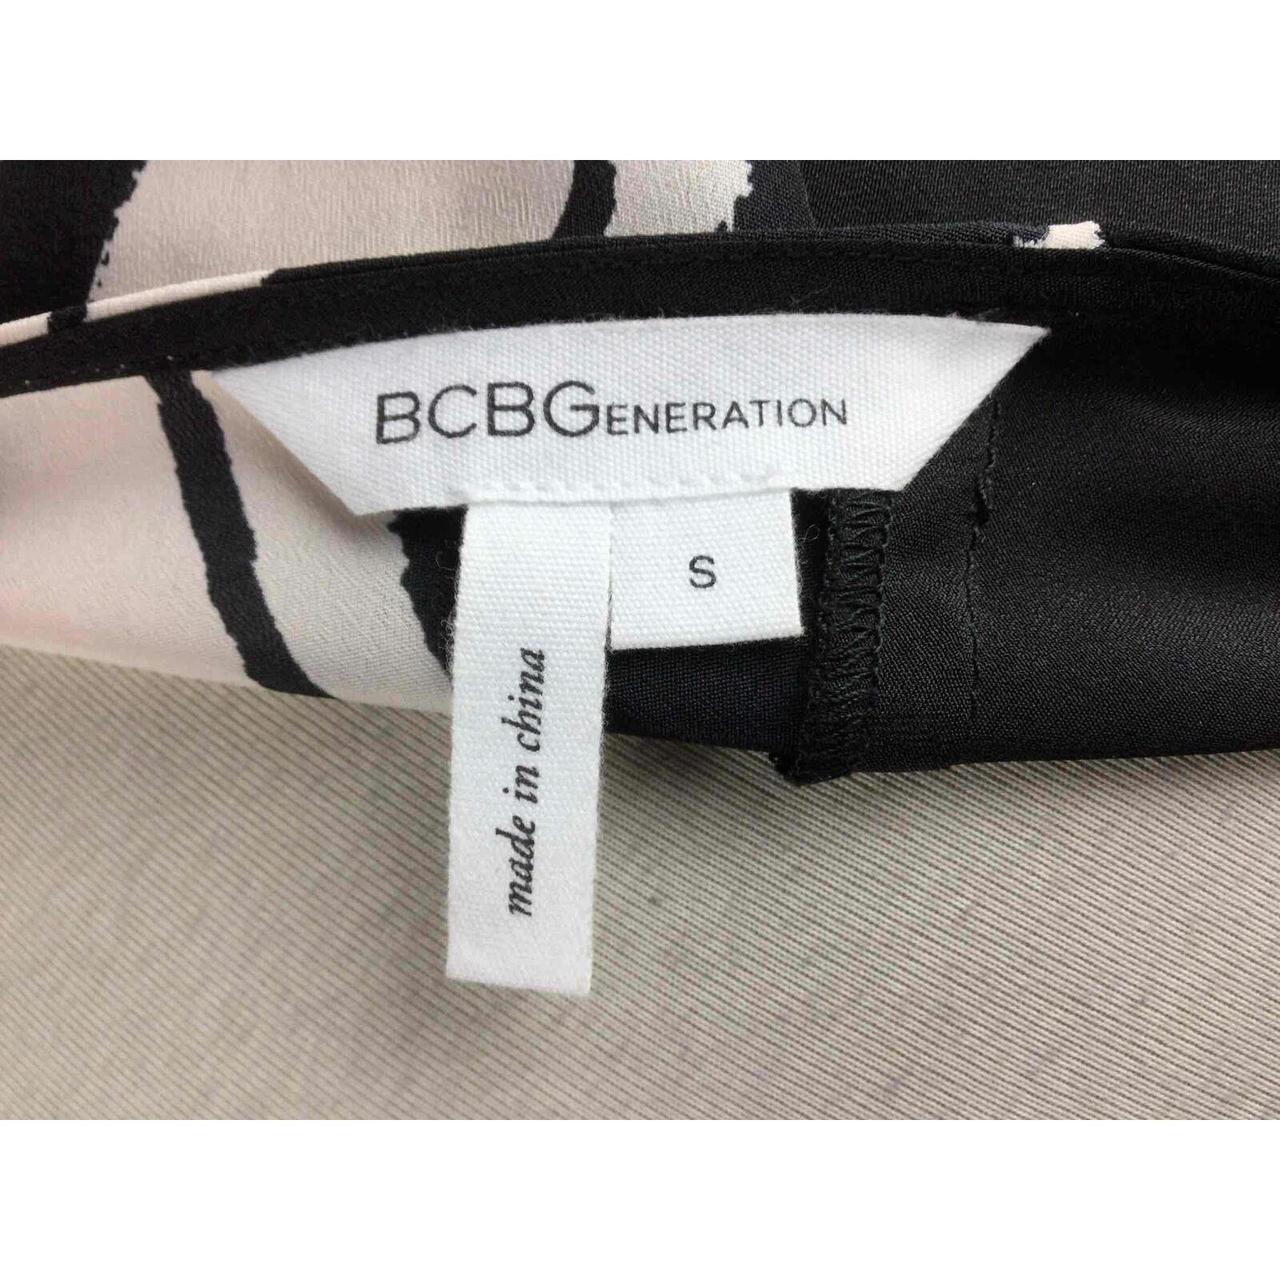 Product Image 2 - BCBGeneration Peach Black Polyester Striped